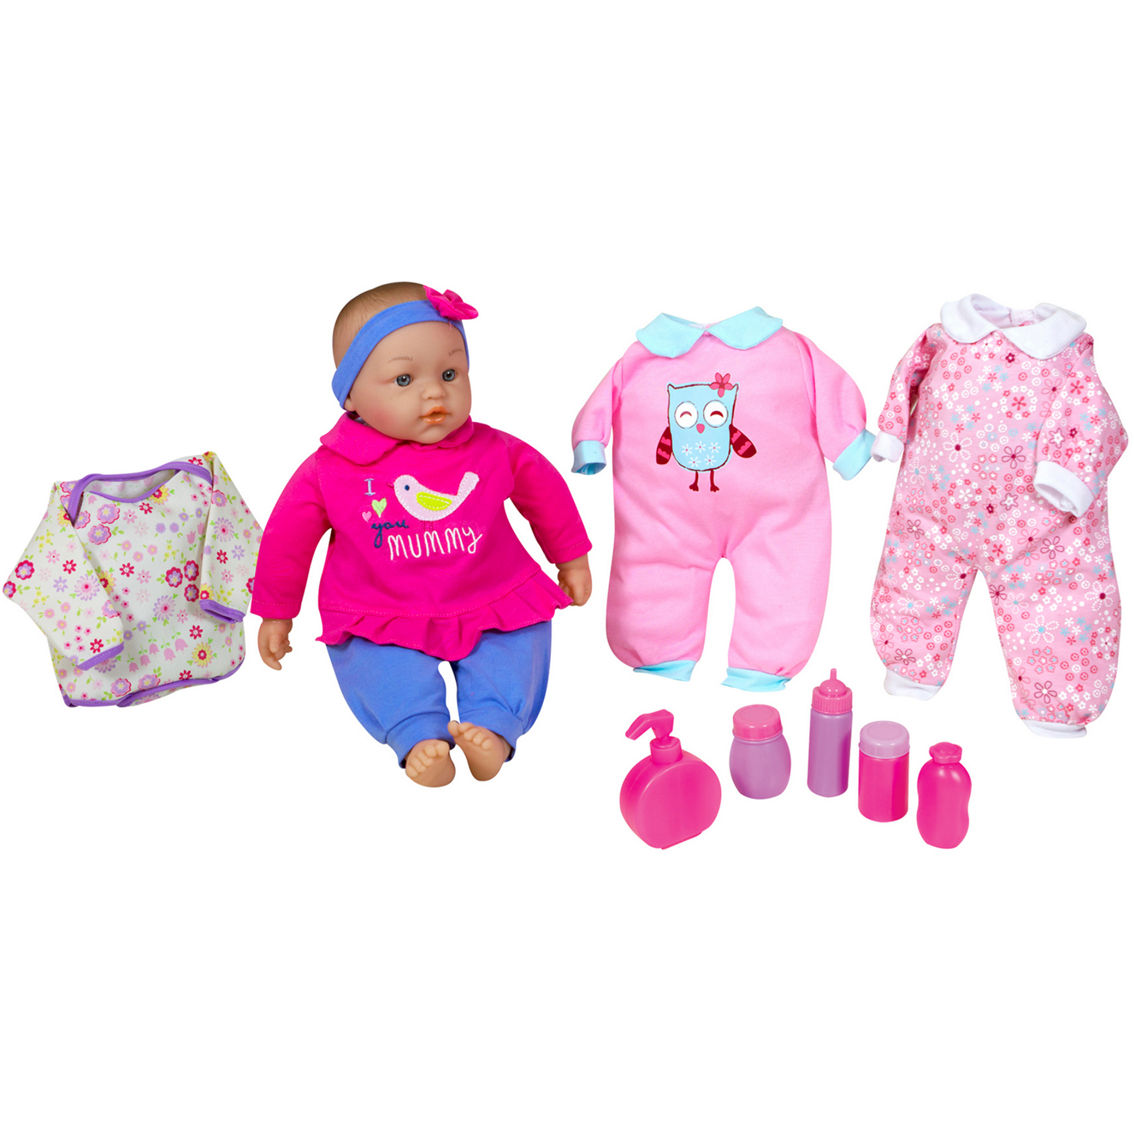 Lissi 15 in. Baby Doll Set with Extra Clothes & Accessories - Image 2 of 2